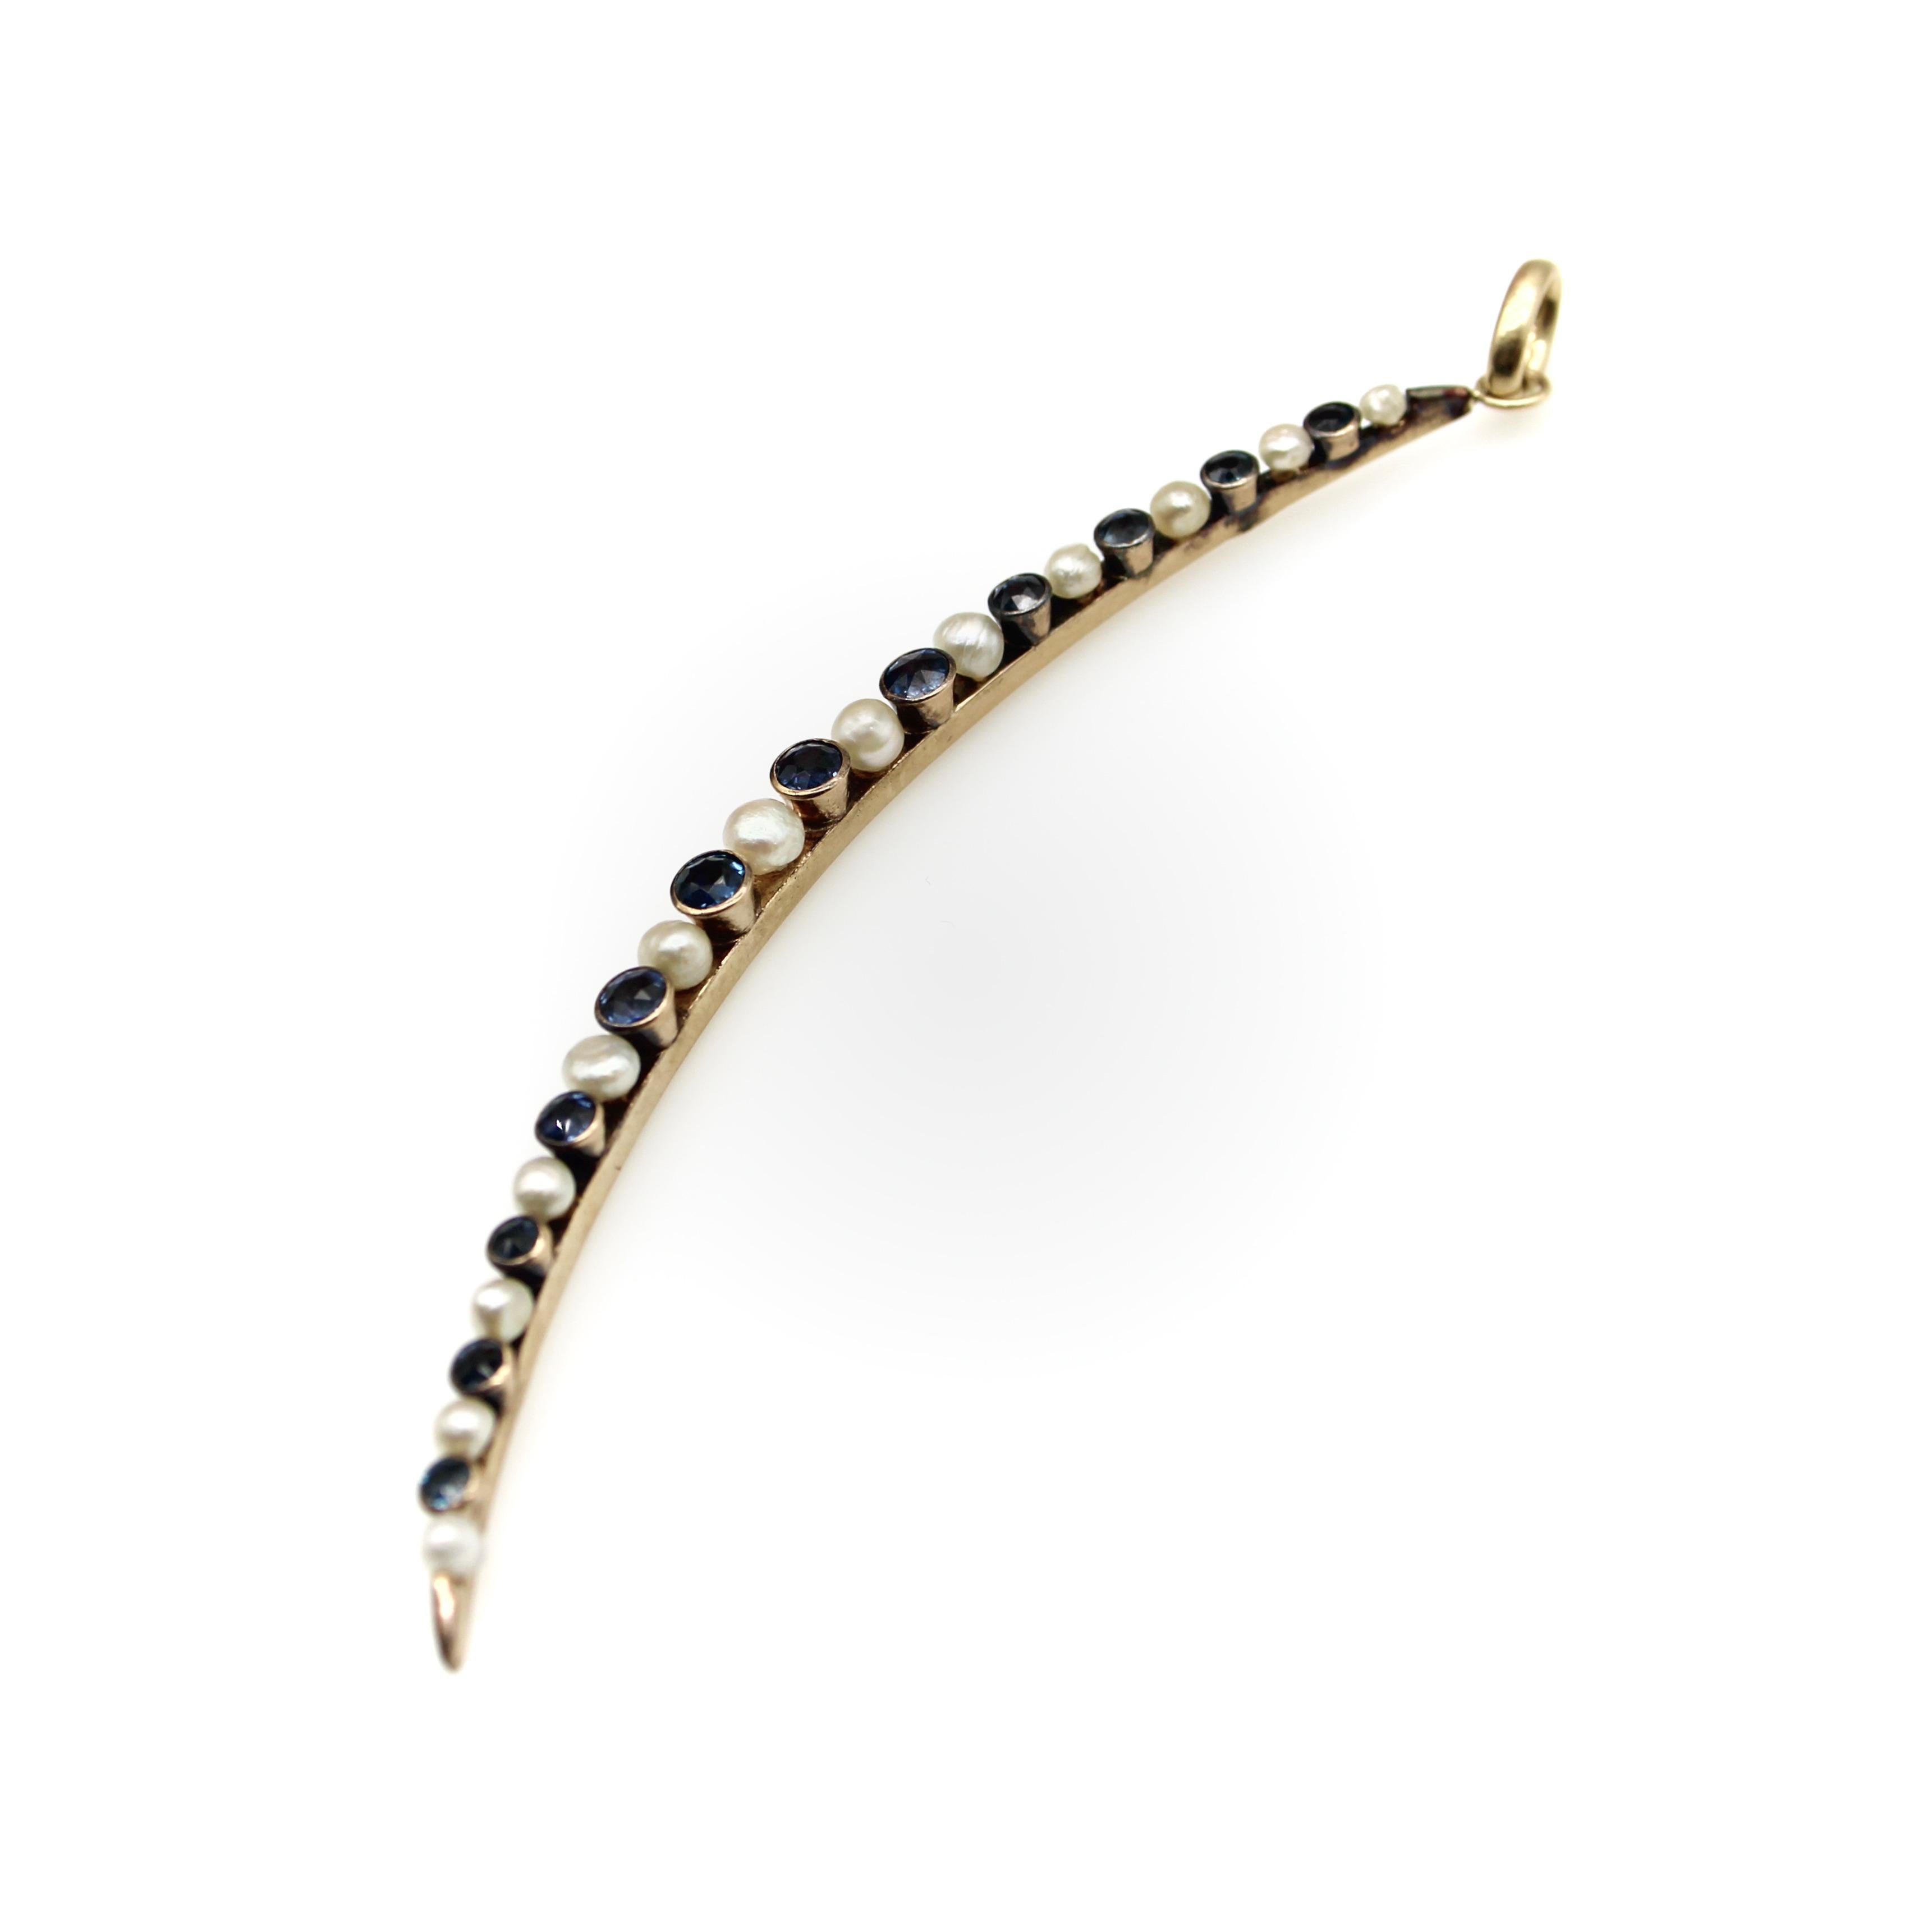 This elongated crescent moon contains graduated alternating pearls and sapphires. The pearls are half-drilled and attached with a post from the back, while the sapphires are bezel set into gold settings that appear cup-like when viewed from the